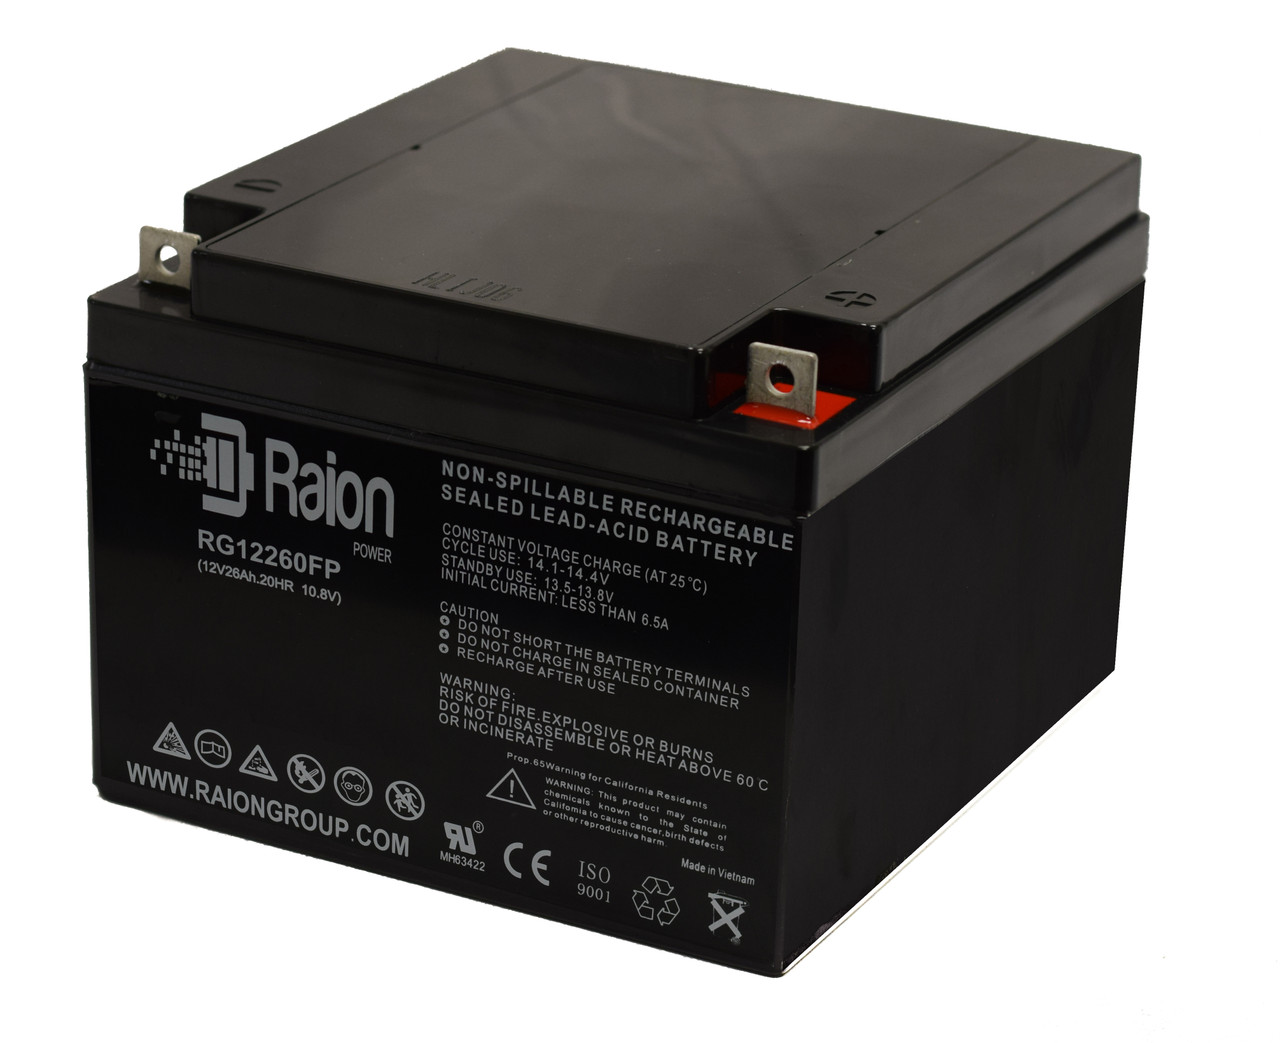 Raion Power Replacement 12V 26Ah Battery for Kweight Power KW 12-24 - 1 Pack